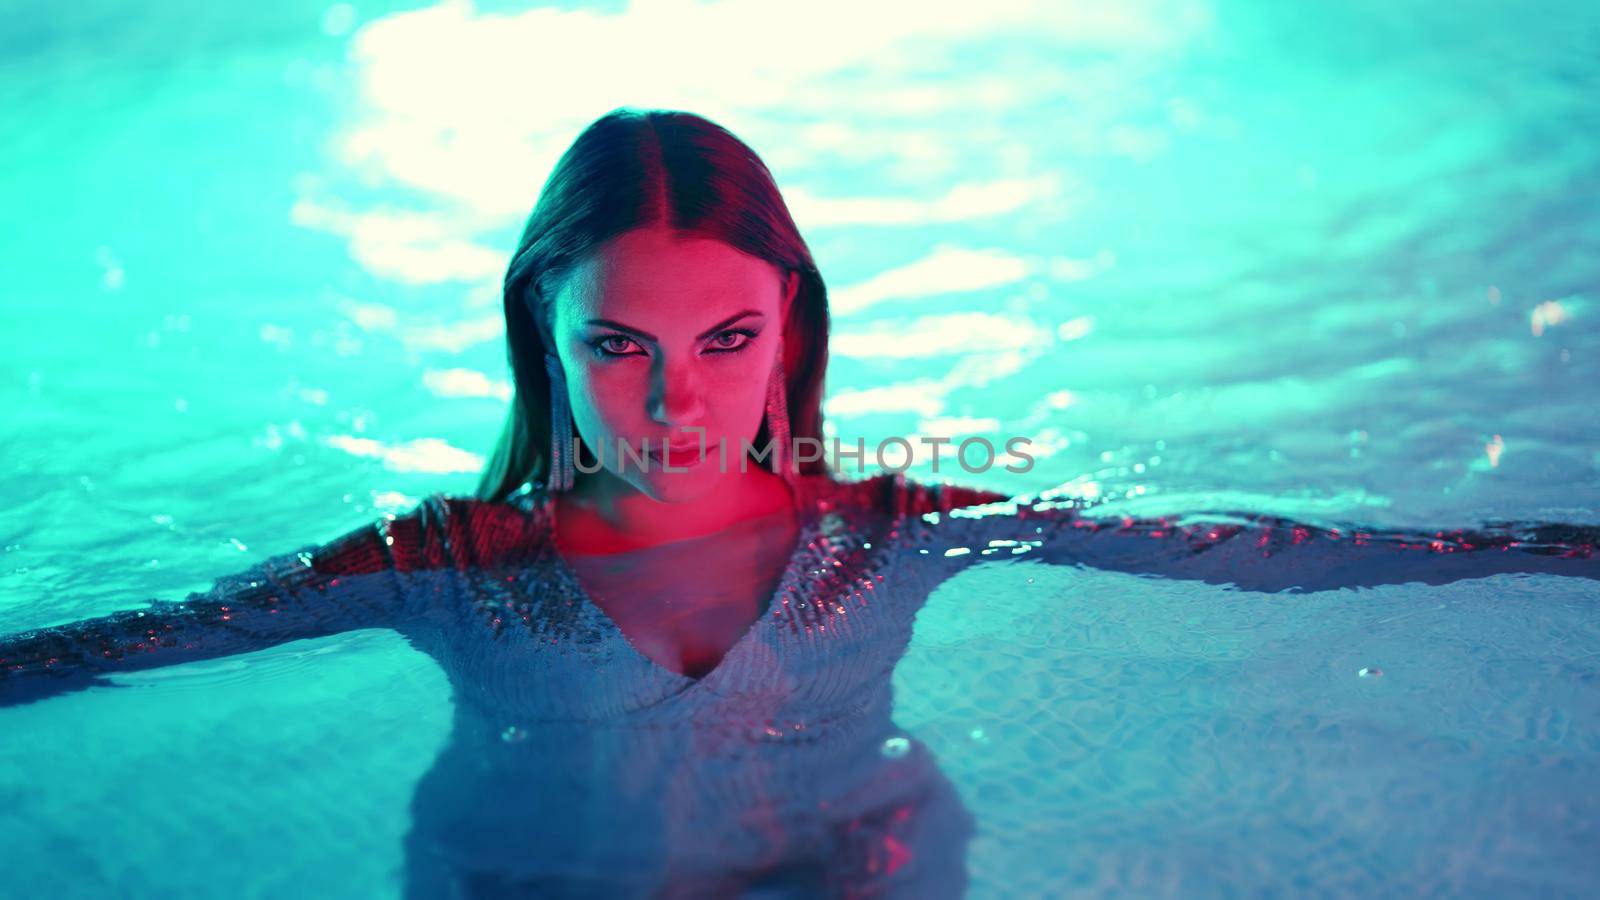 Beautiful woman posing in pool water under neon color light. Party, attractive chic in shining dress enjoying night time. Rich lifestyle, luxury life, influential people by kristina_kokhanova